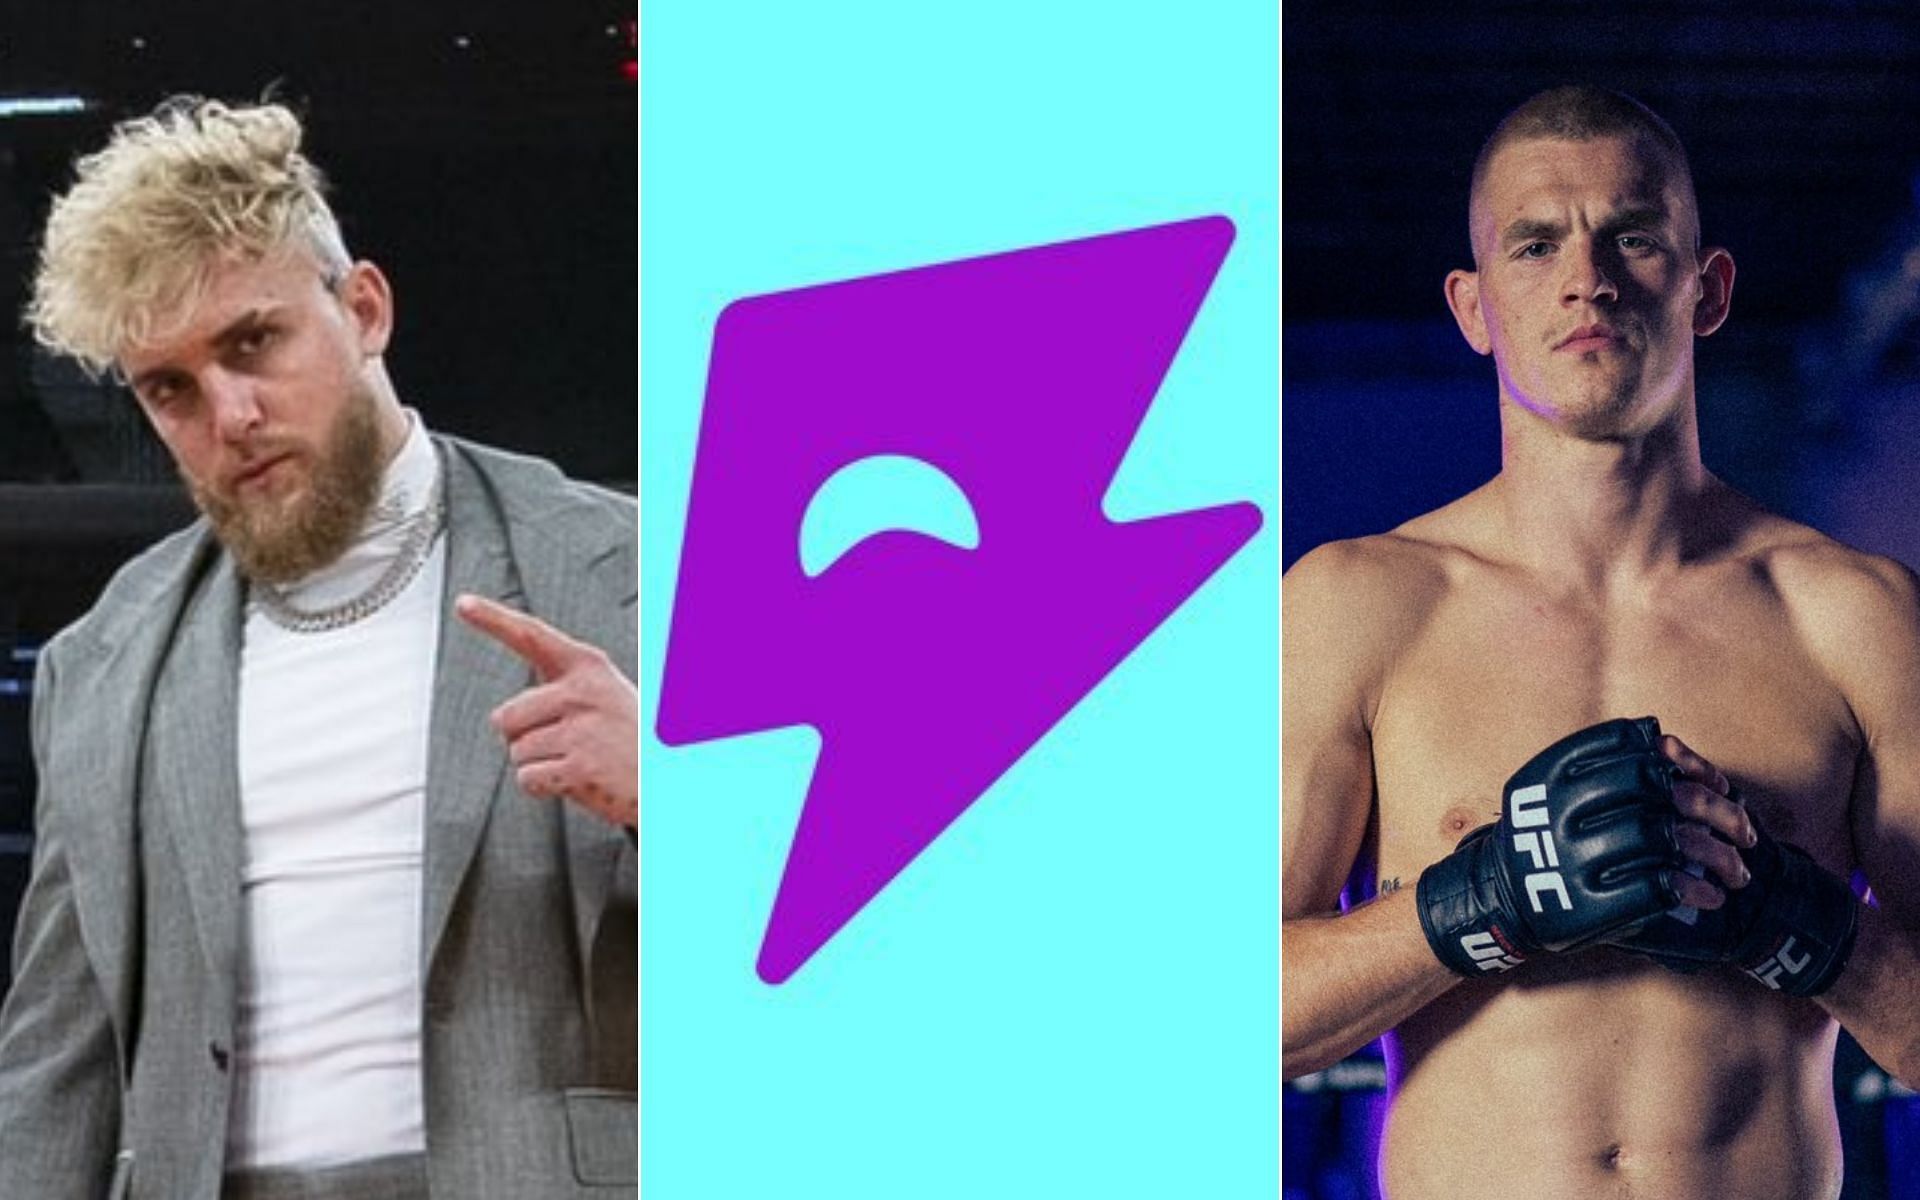 Jake Paul [Left], Betr logo [Middle], and Ian Garry [Right] [Photo credit: @jakepaul and @betr - Twitter]